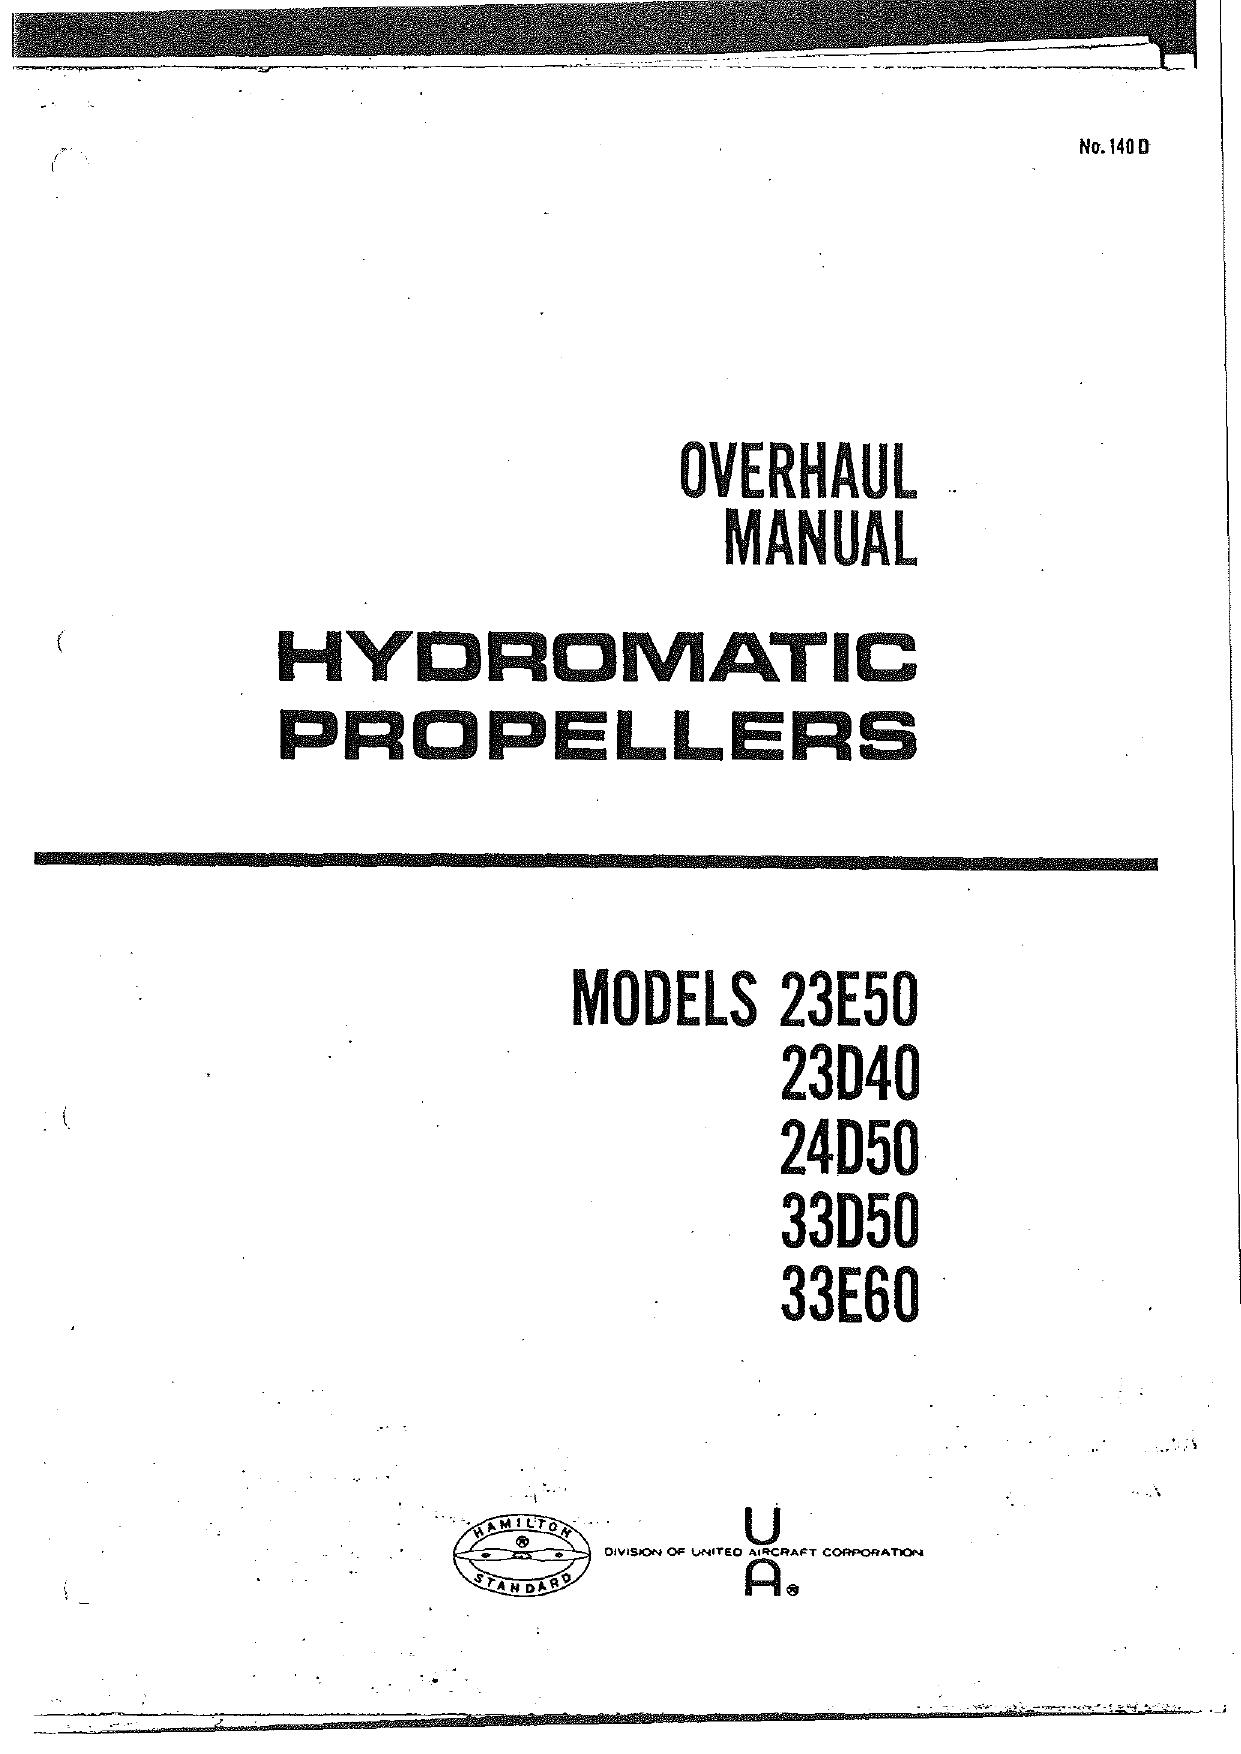 Sample page 1 from AirCorps Library document: Overhaul Manual for Hydromatic Propellers